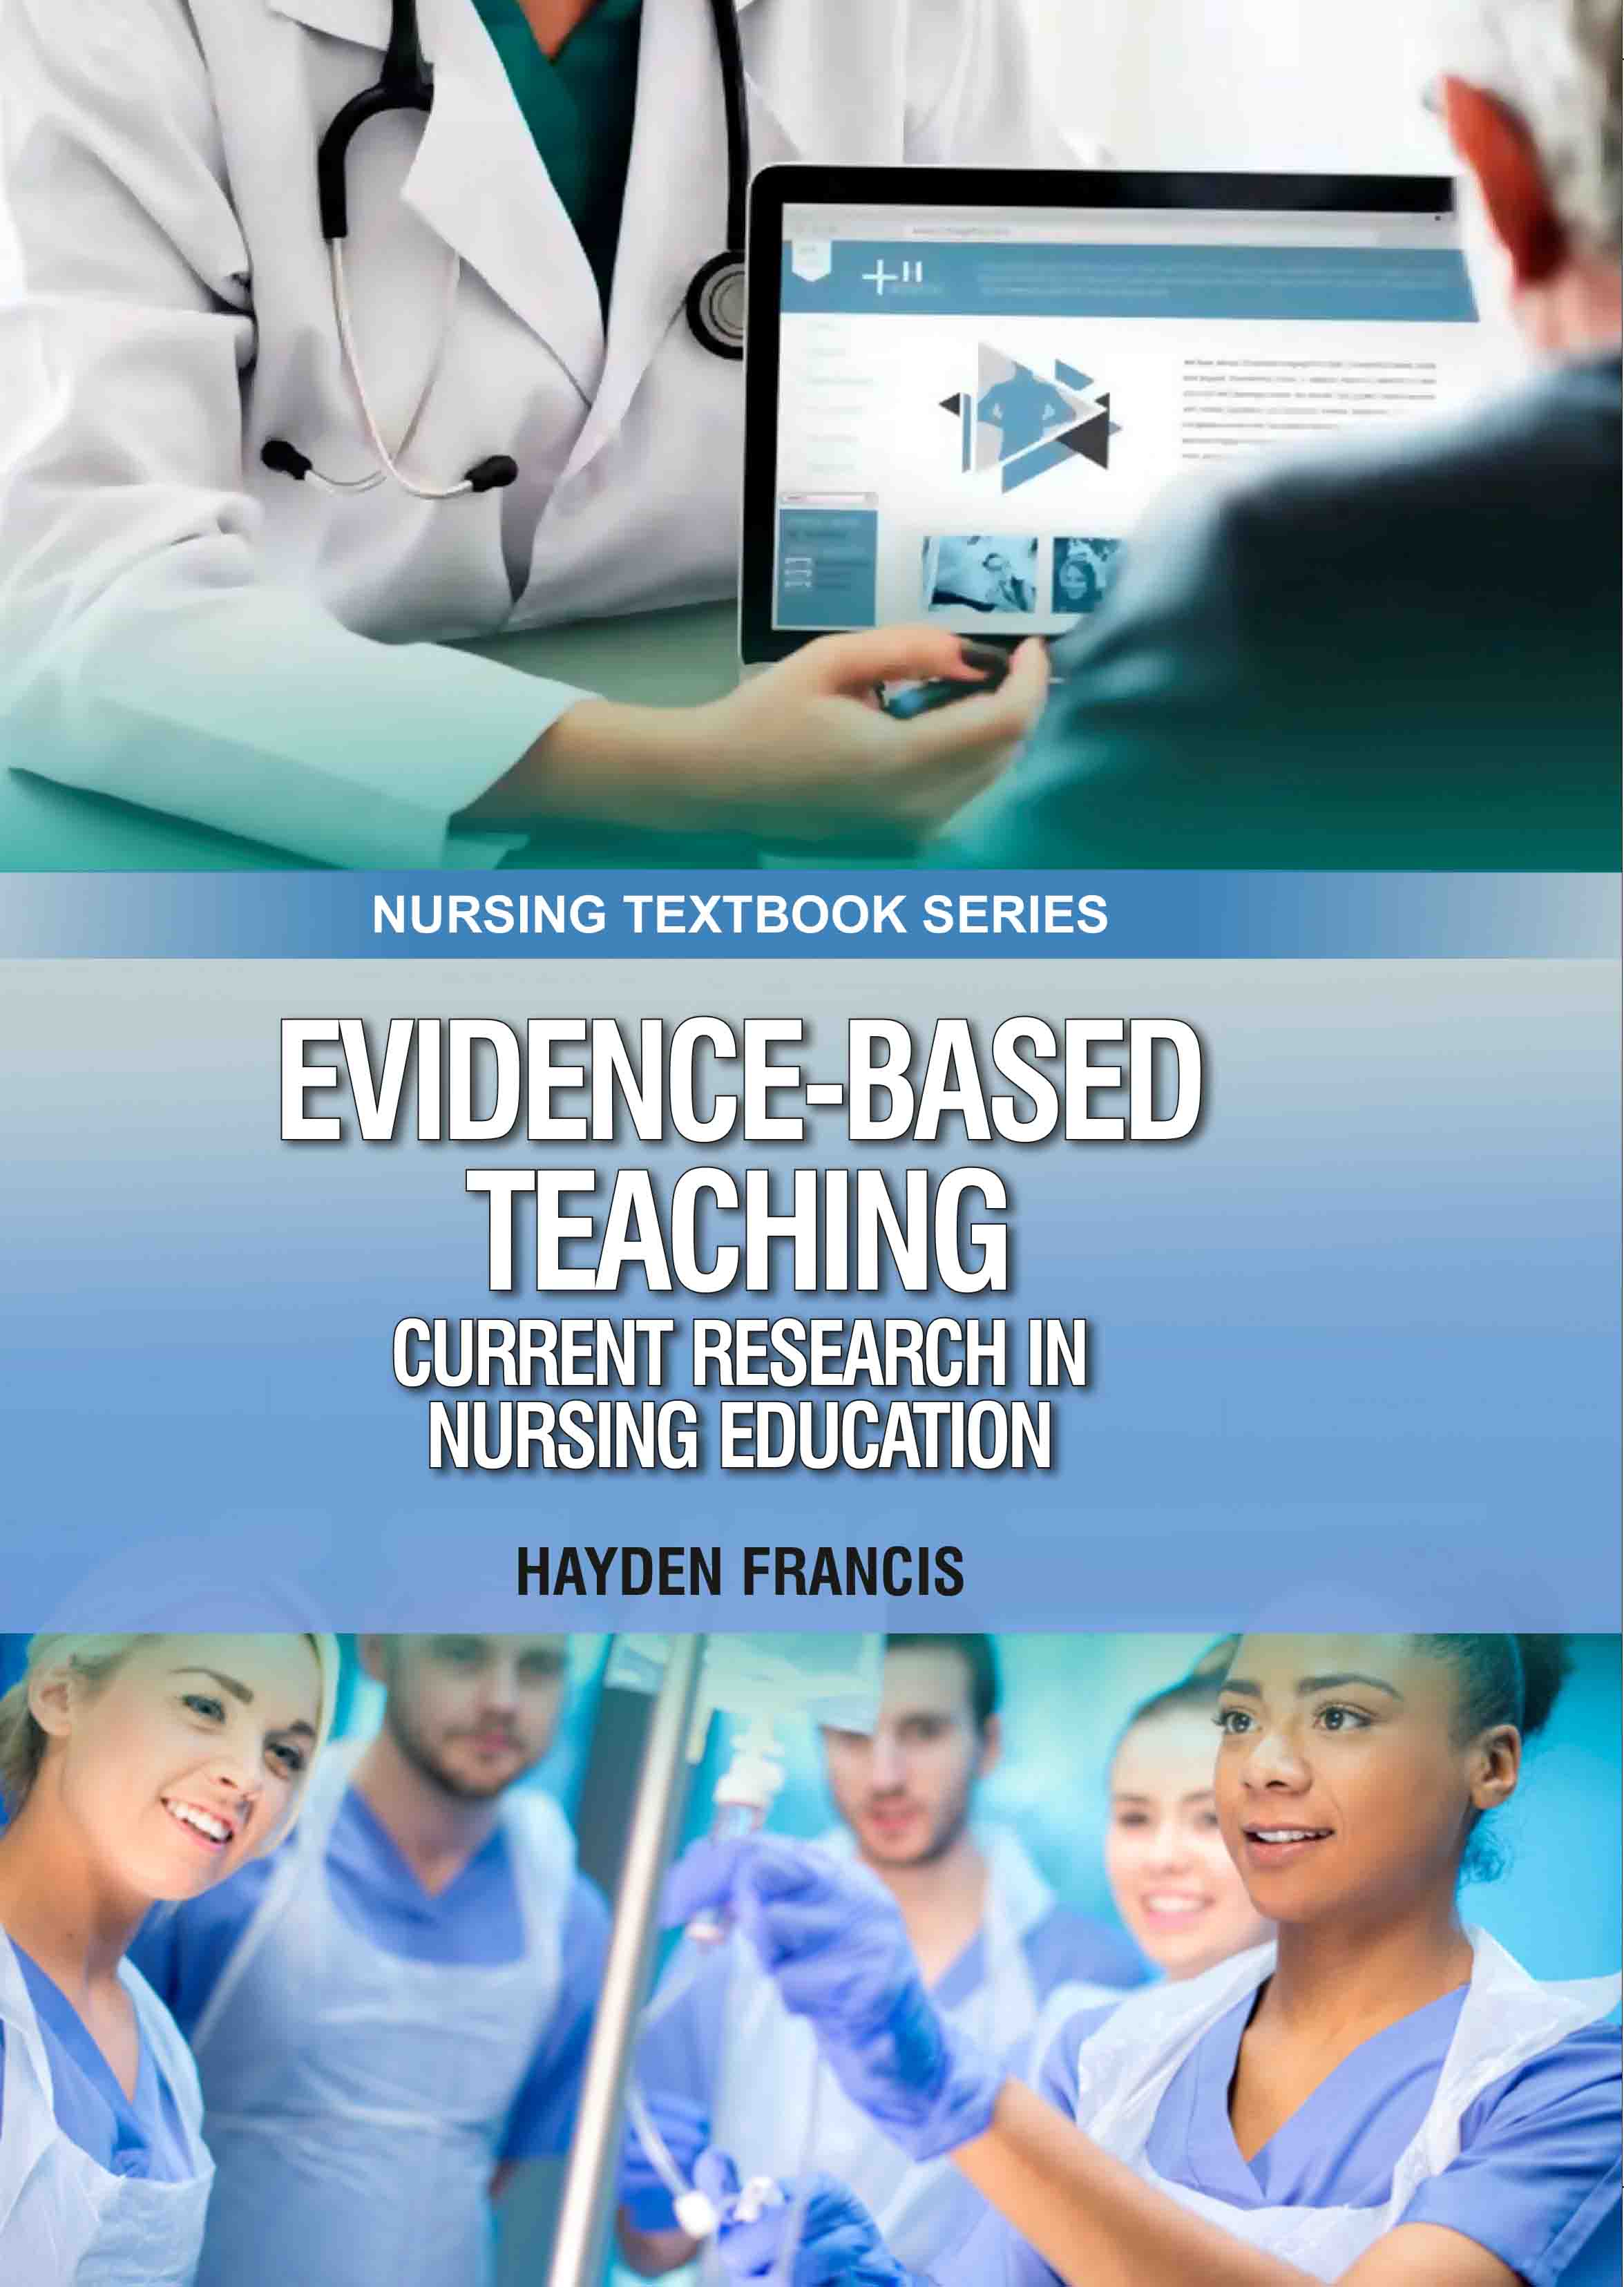 EvidenceBased Teaching: Current Research in Nursing Education